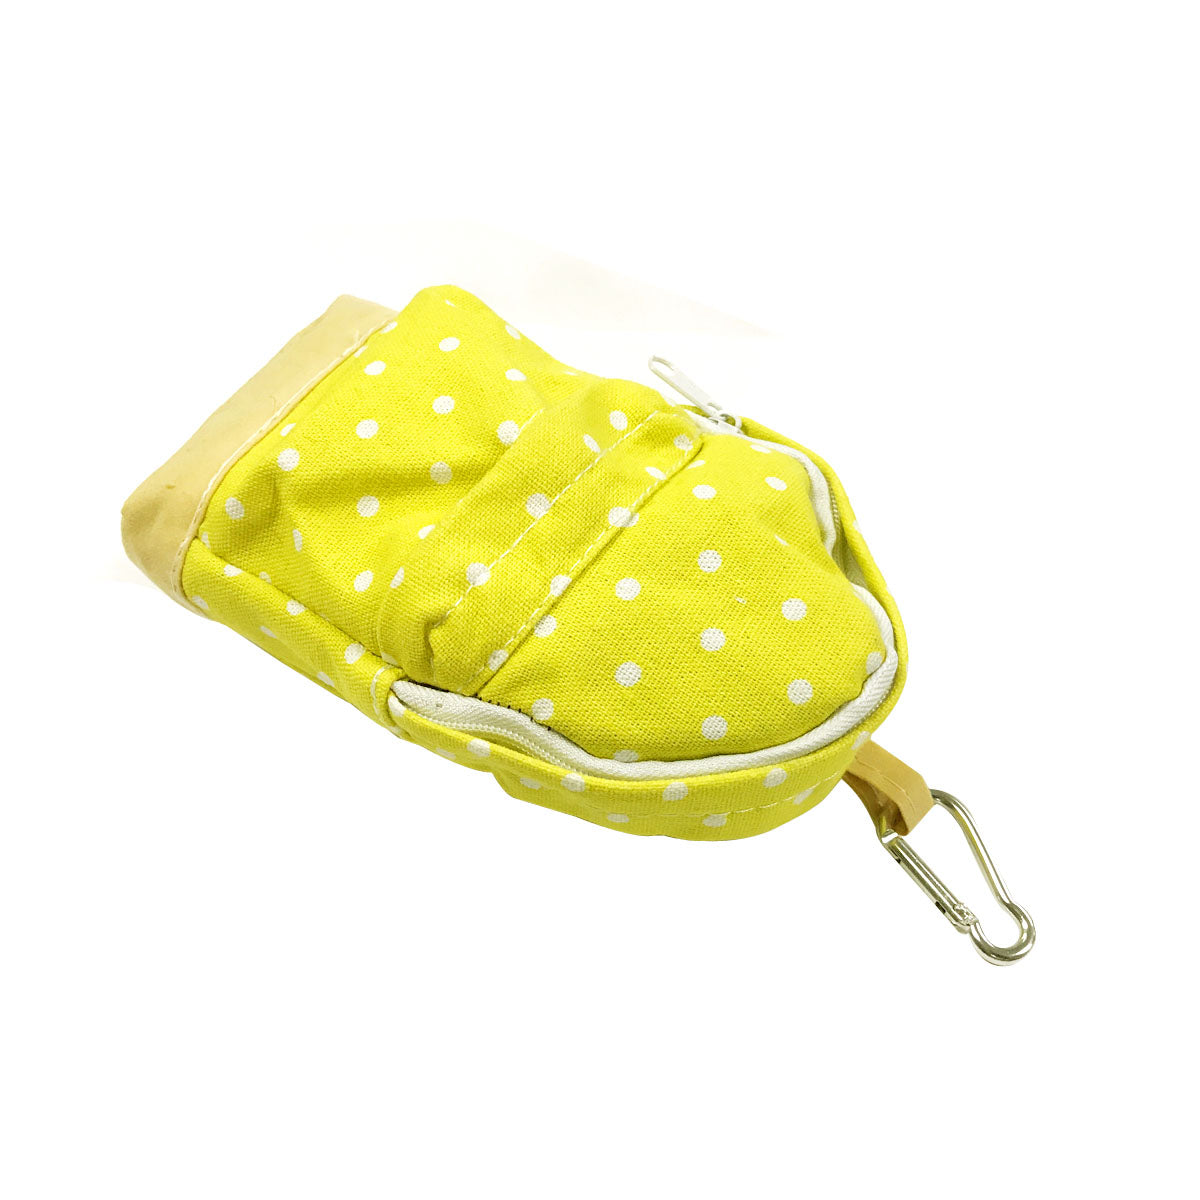 Wrapables Mini Backpack Pencil Case Pouch